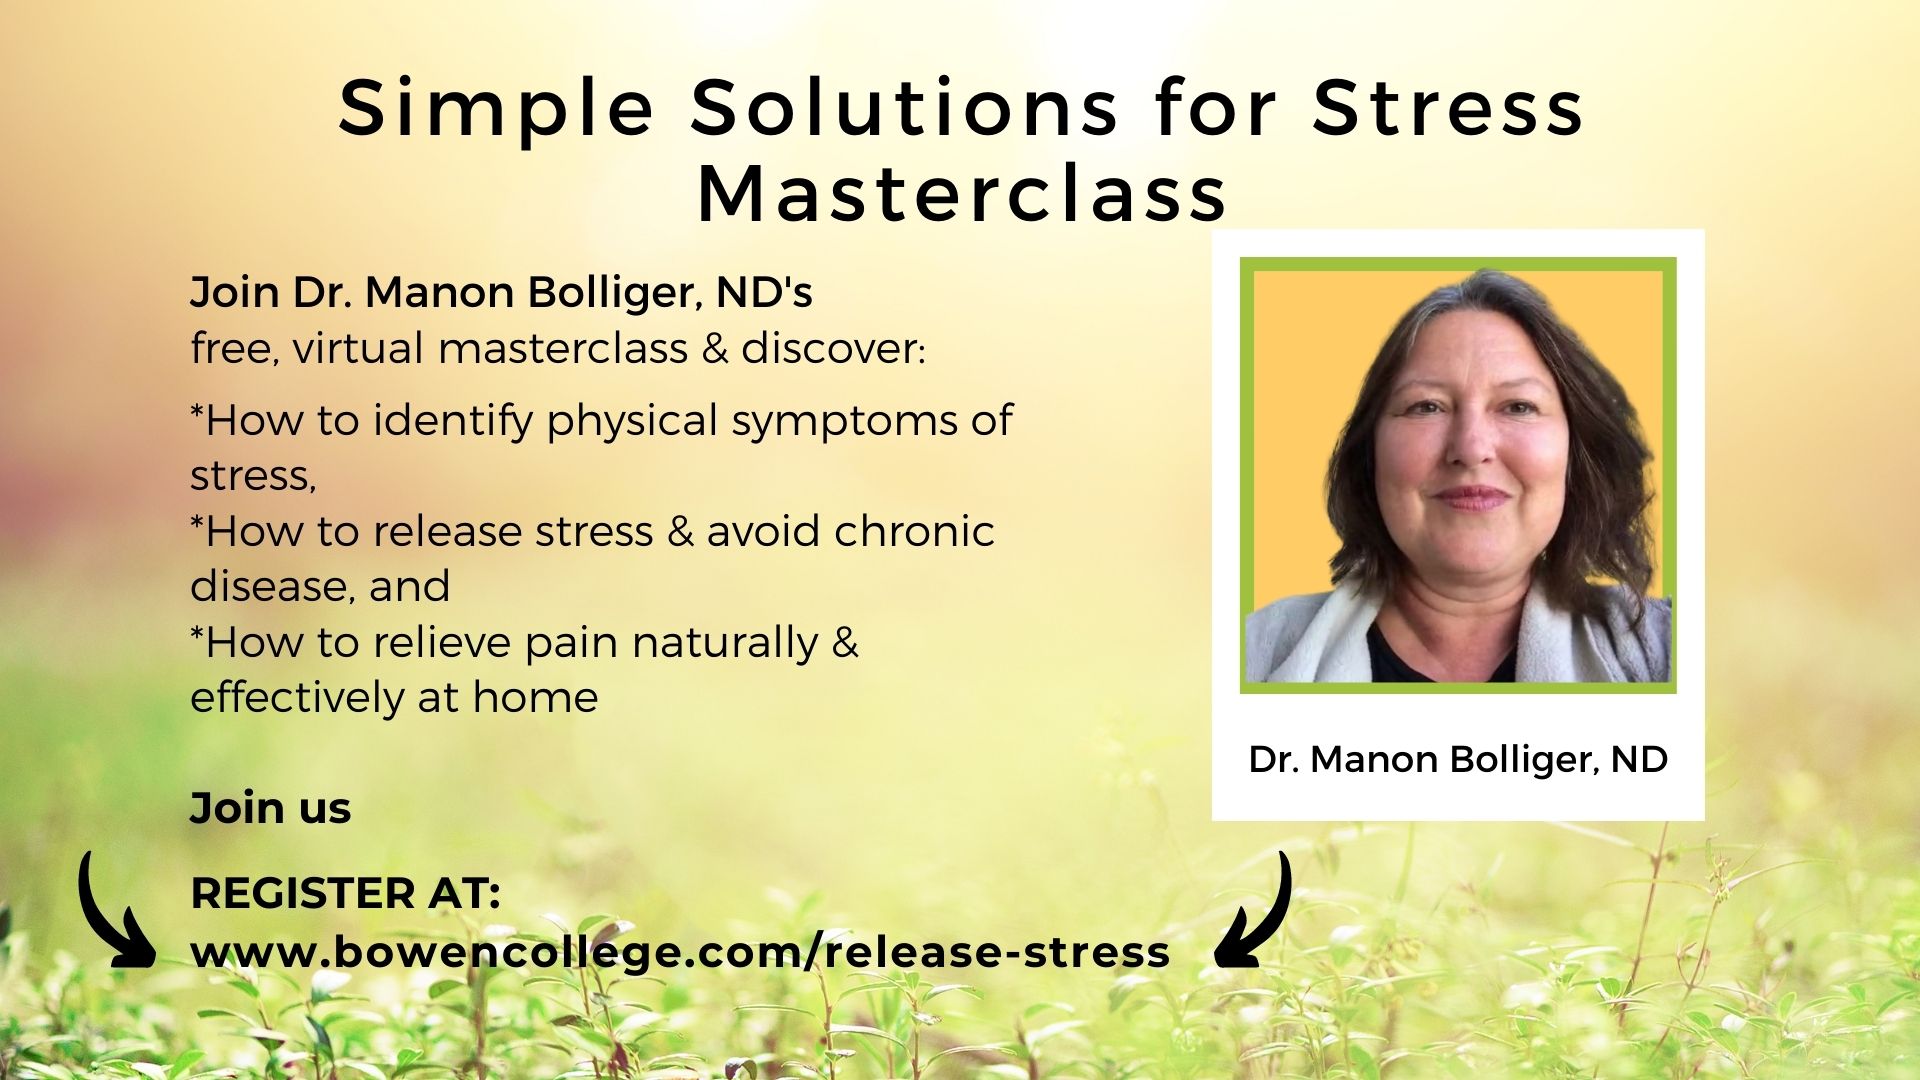 Simple Solutions for Stress